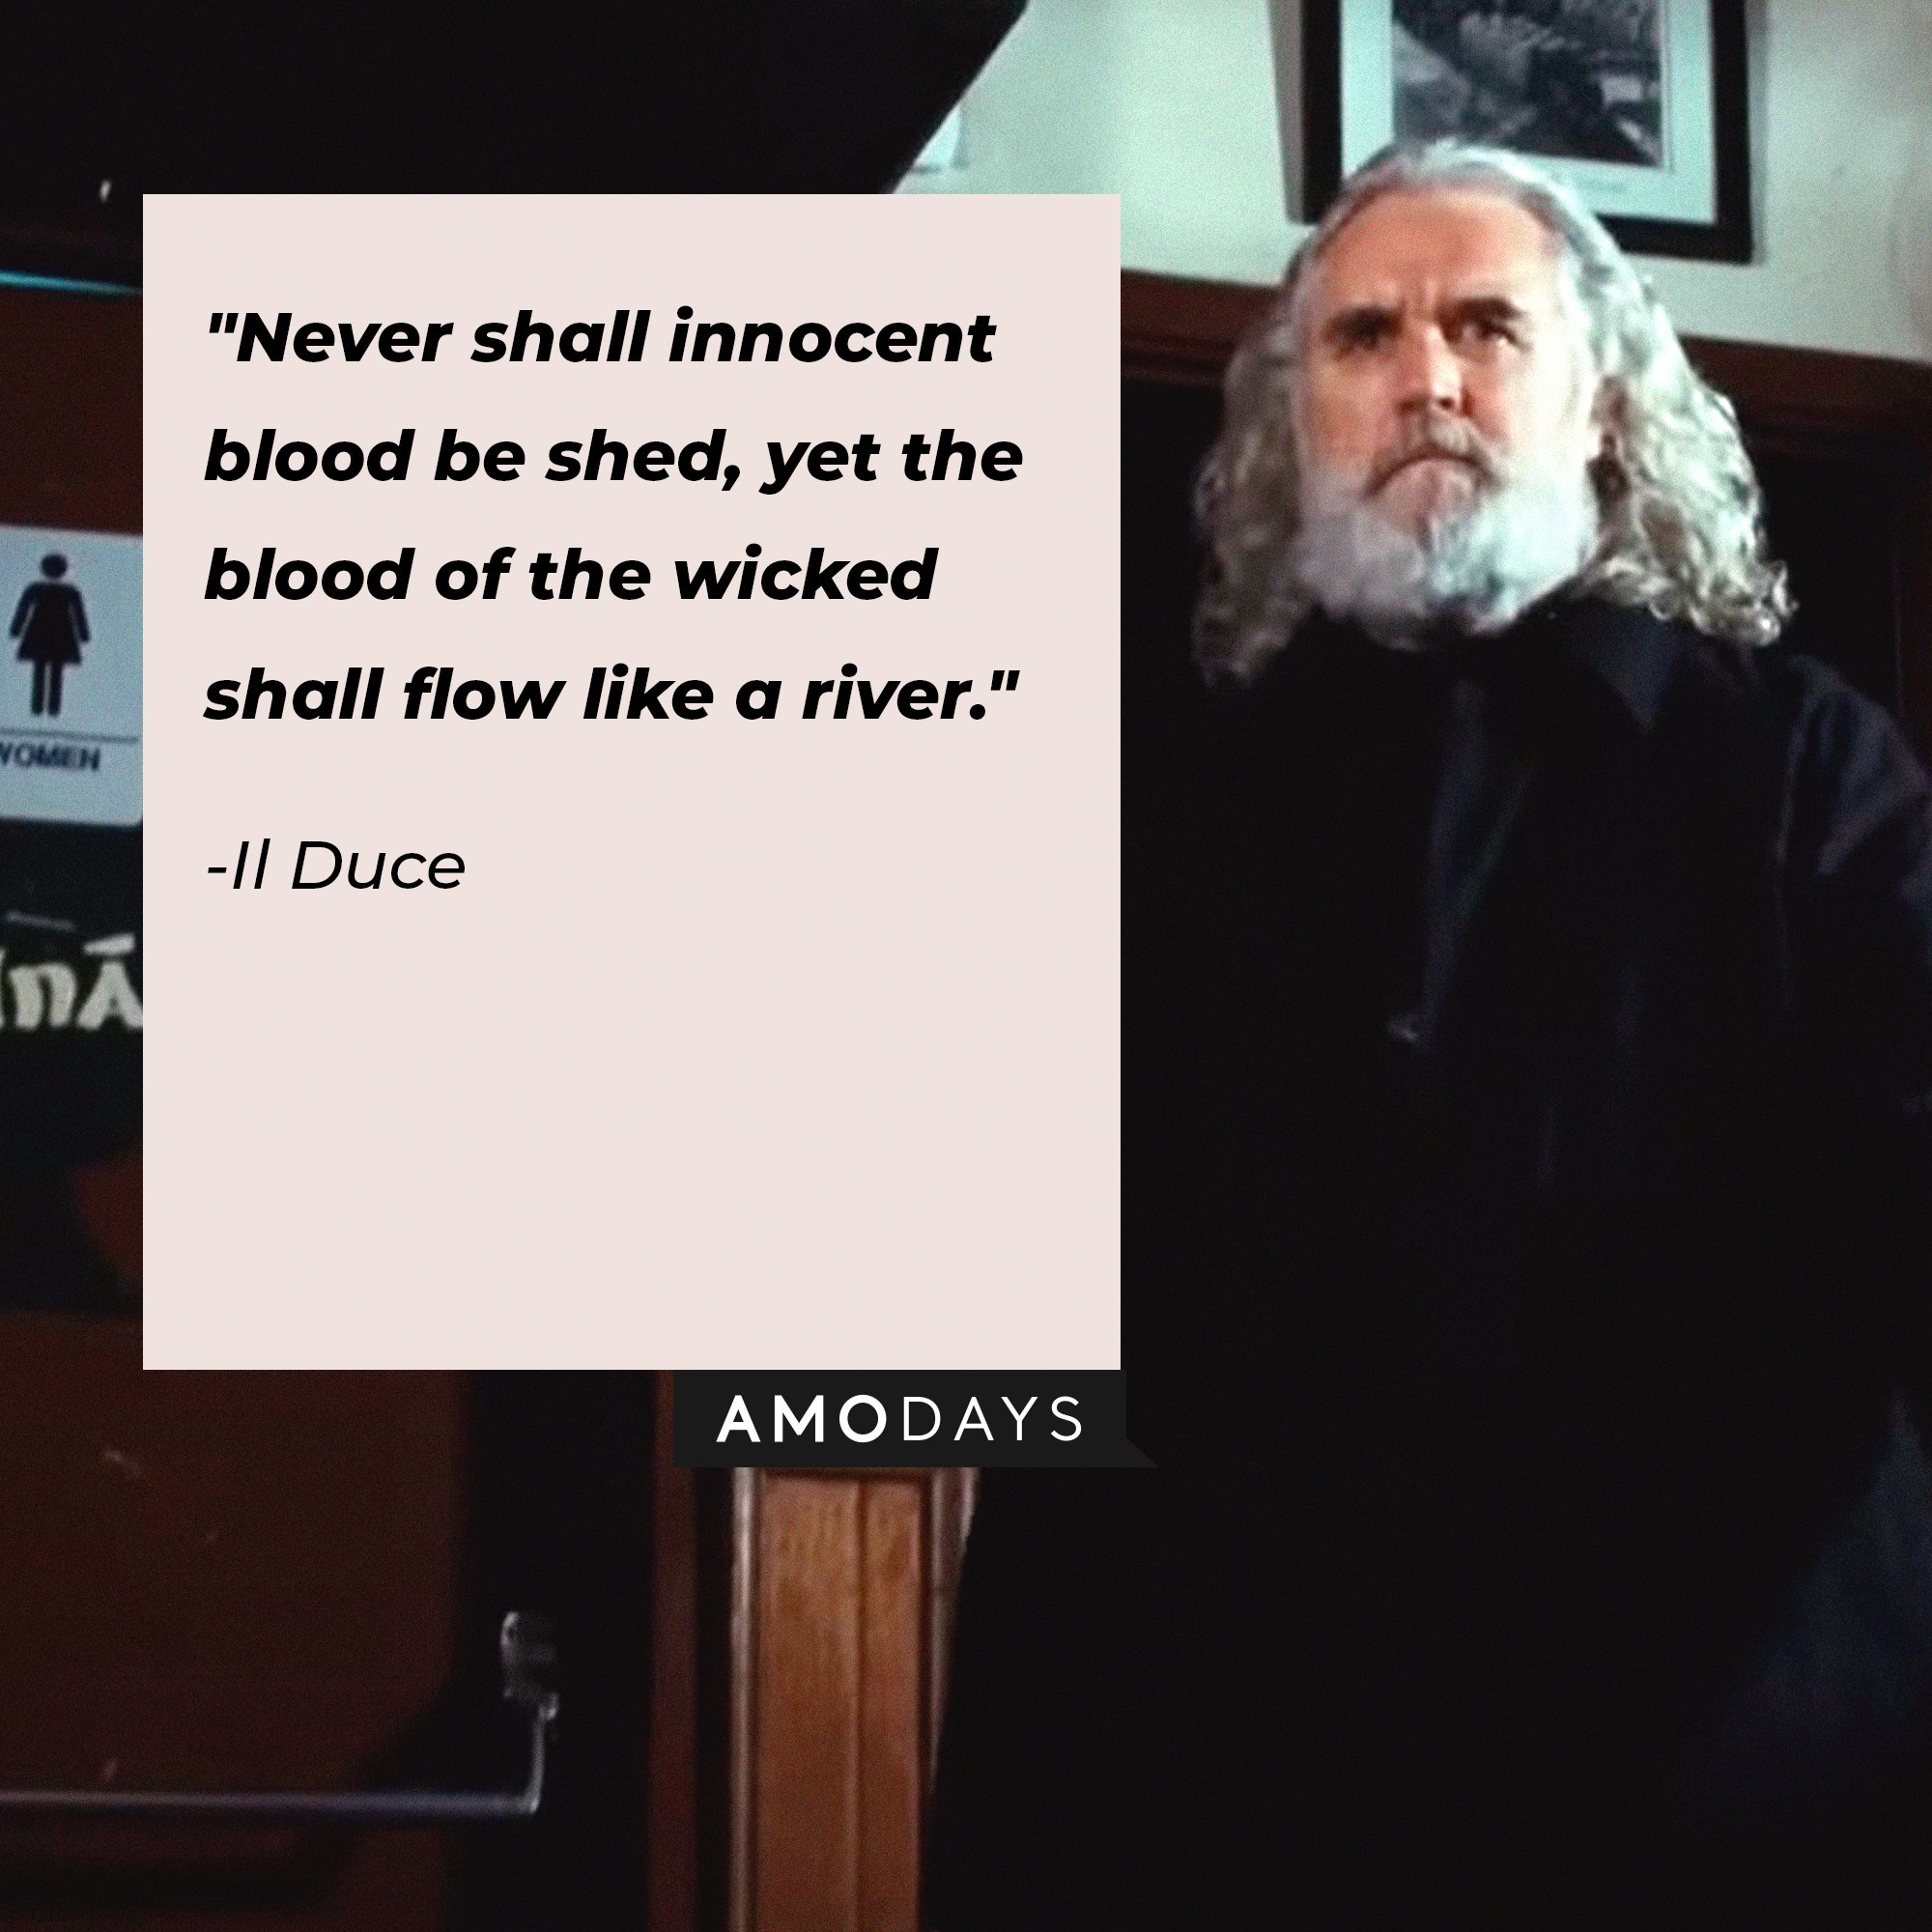 Il Duce’s quote: "Never shall innocent blood be shed, yet the blood of the wicked shall flow like a river." | Image: AmoDays